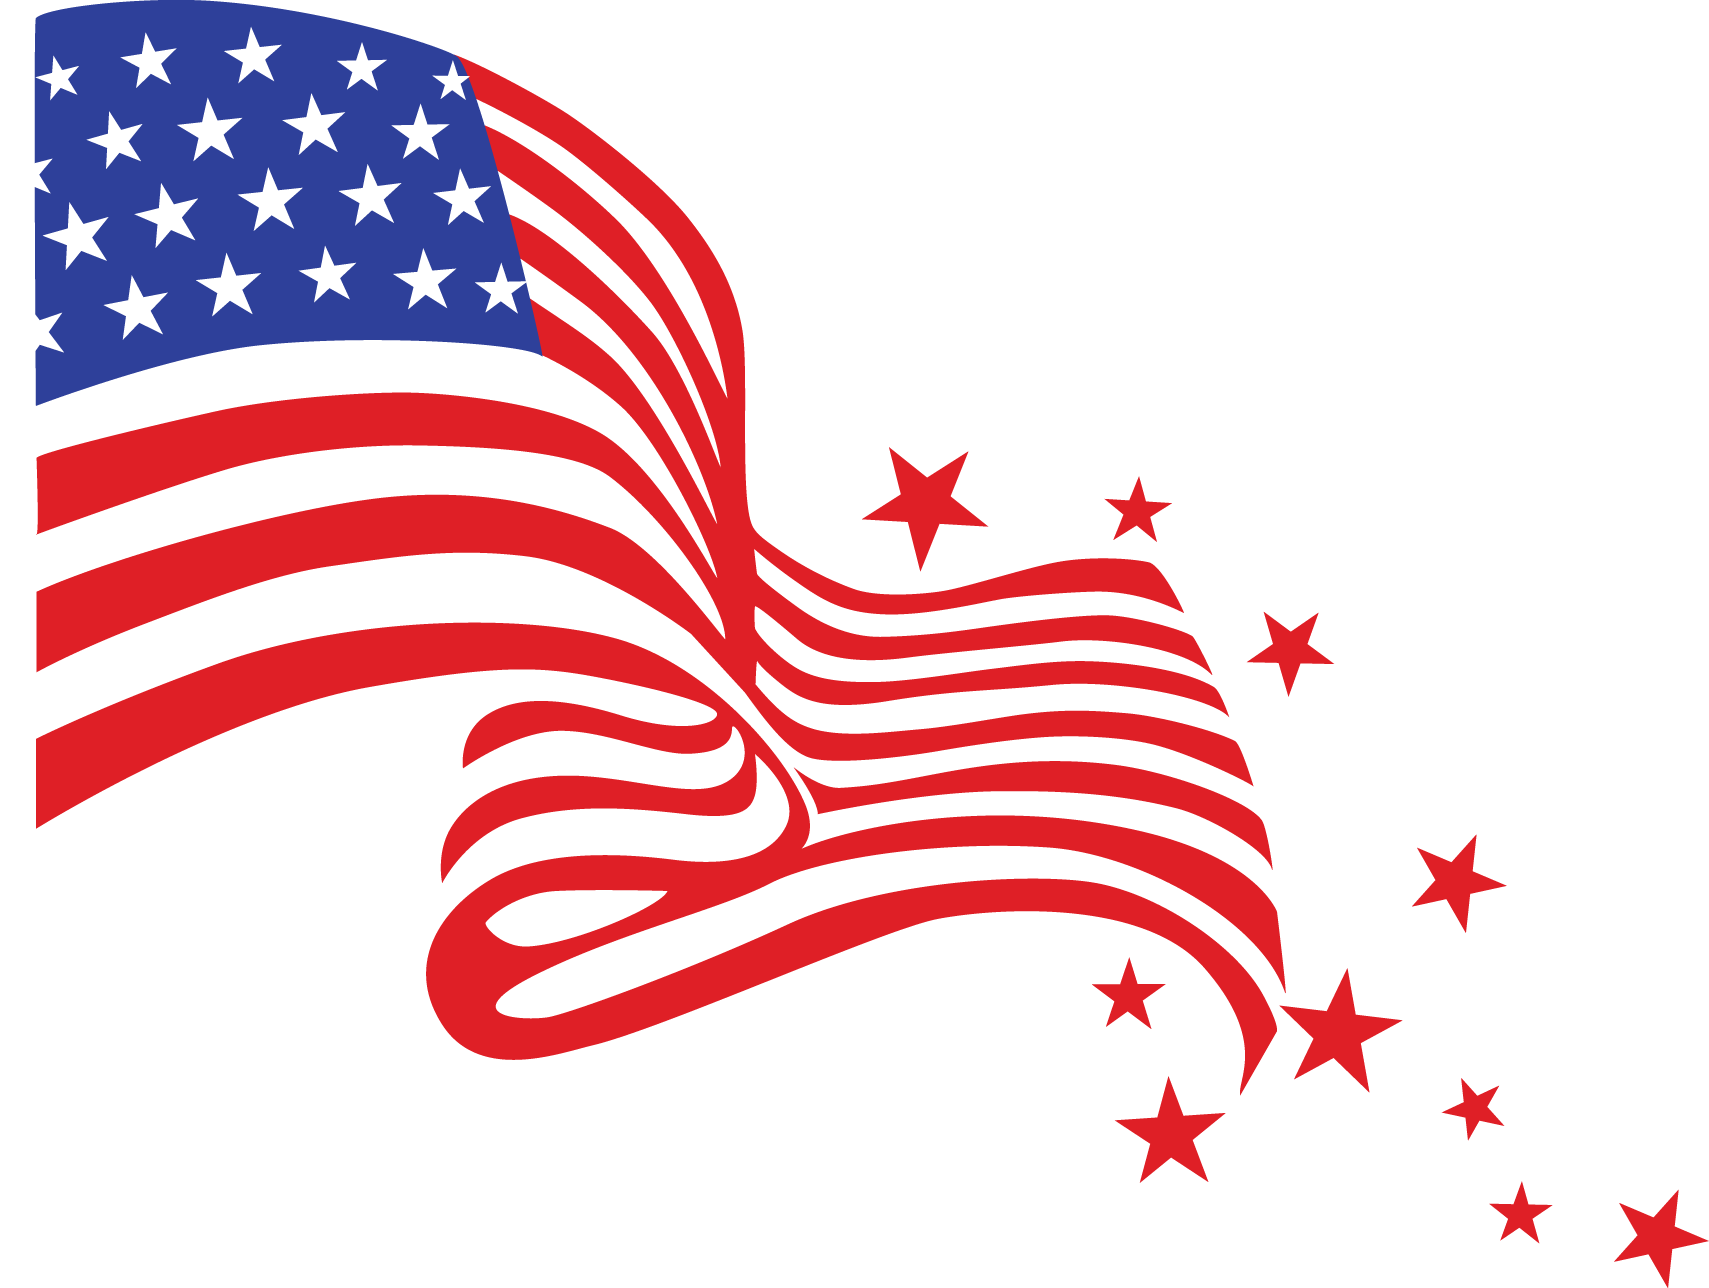 Free American Flags Free Download Png Clipart